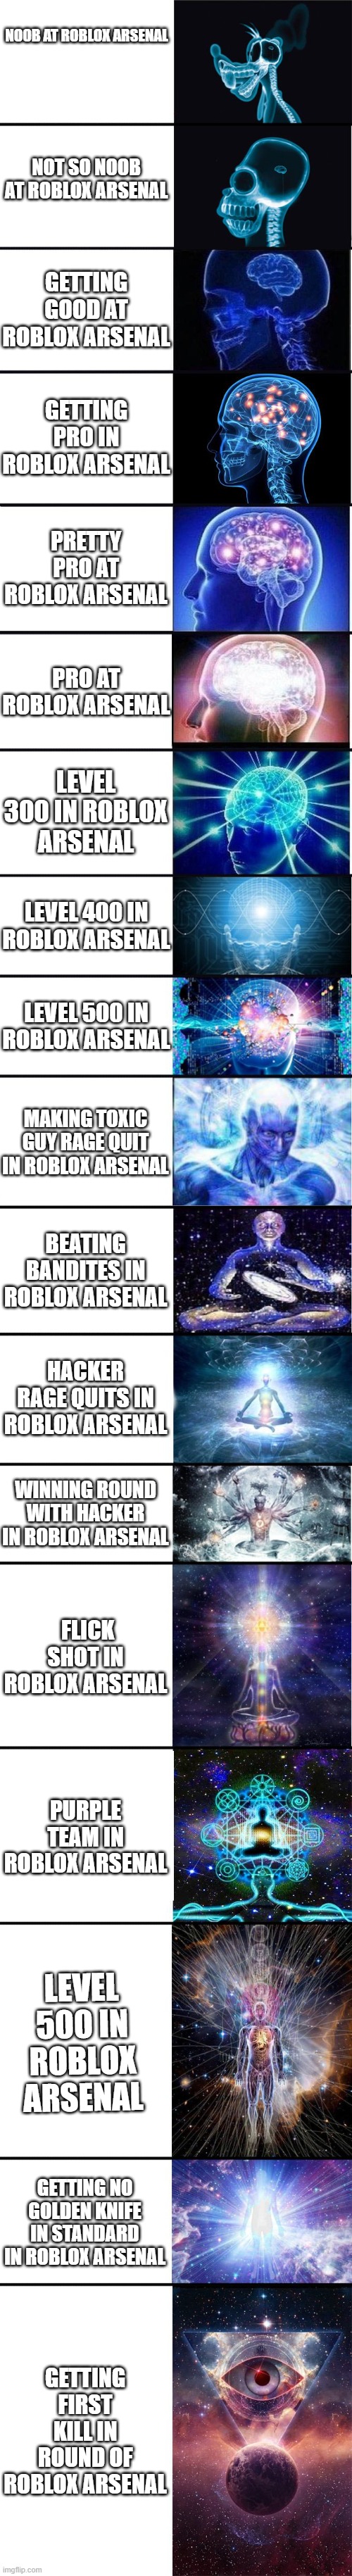 why roblox arsenal obsession is crazy | NOOB AT ROBLOX ARSENAL; NOT SO NOOB AT ROBLOX ARSENAL; GETTING GOOD AT ROBLOX ARSENAL; GETTING PRO IN ROBLOX ARSENAL; PRETTY PRO AT ROBLOX ARSENAL; PRO AT ROBLOX ARSENAL; LEVEL 300 IN ROBLOX ARSENAL; LEVEL 400 IN ROBLOX ARSENAL; LEVEL 500 IN ROBLOX ARSENAL; MAKING TOXIC GUY RAGE QUIT IN ROBLOX ARSENAL; BEATING BANDITES IN ROBLOX ARSENAL; HACKER RAGE QUITS IN ROBLOX ARSENAL; WINNING ROUND WITH HACKER IN ROBLOX ARSENAL; FLICK SHOT IN ROBLOX ARSENAL; PURPLE TEAM IN ROBLOX ARSENAL; LEVEL 500 IN ROBLOX ARSENAL; GETTING NO GOLDEN KNIFE IN STANDARD IN ROBLOX ARSENAL; GETTING FIRST KILL IN ROUND OF ROBLOX ARSENAL | image tagged in expanding brain 9001 | made w/ Imgflip meme maker